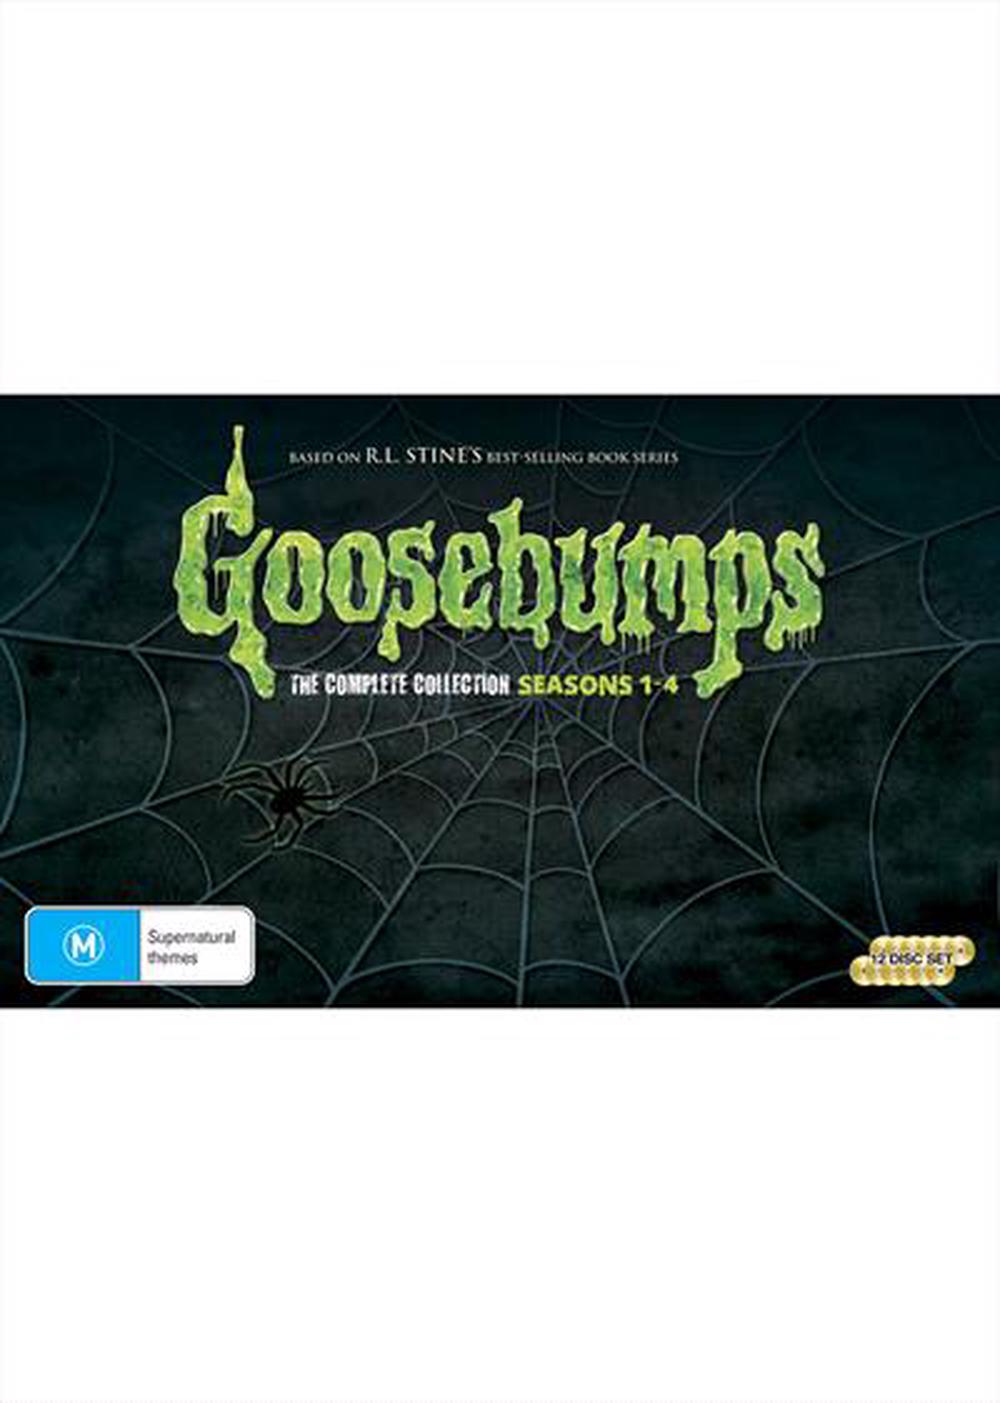 Goosebumps Series Collection Dvd Buy Online At The Nile 7794